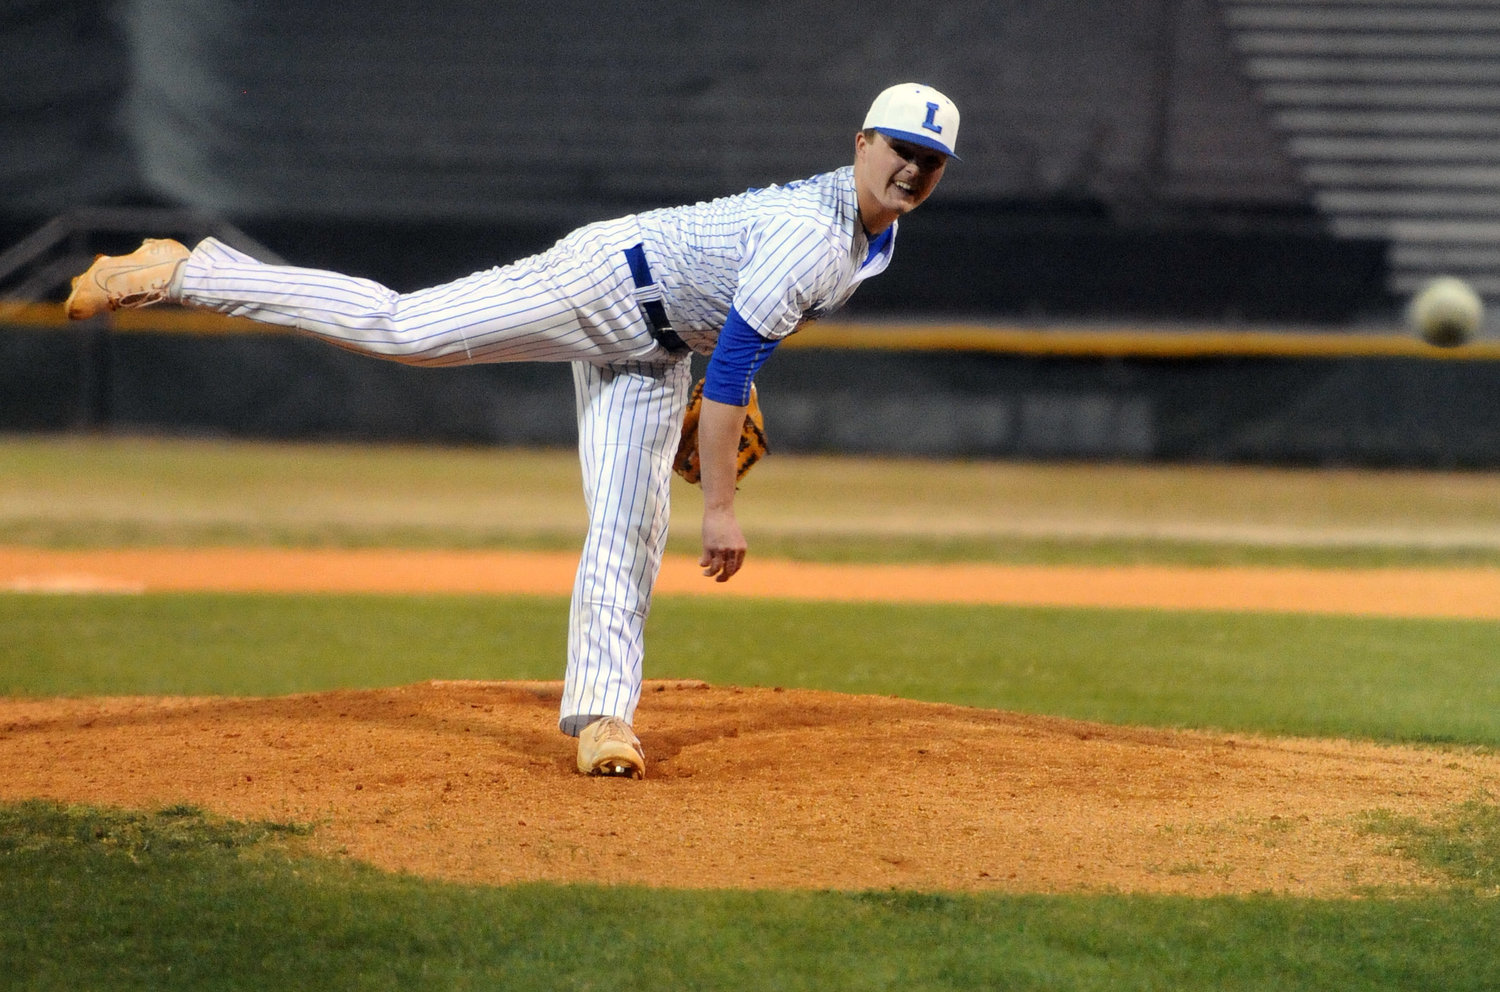 Senior Bryson Hammons worked out of a bases-loaded jam in the top of the sixth inning with one out.